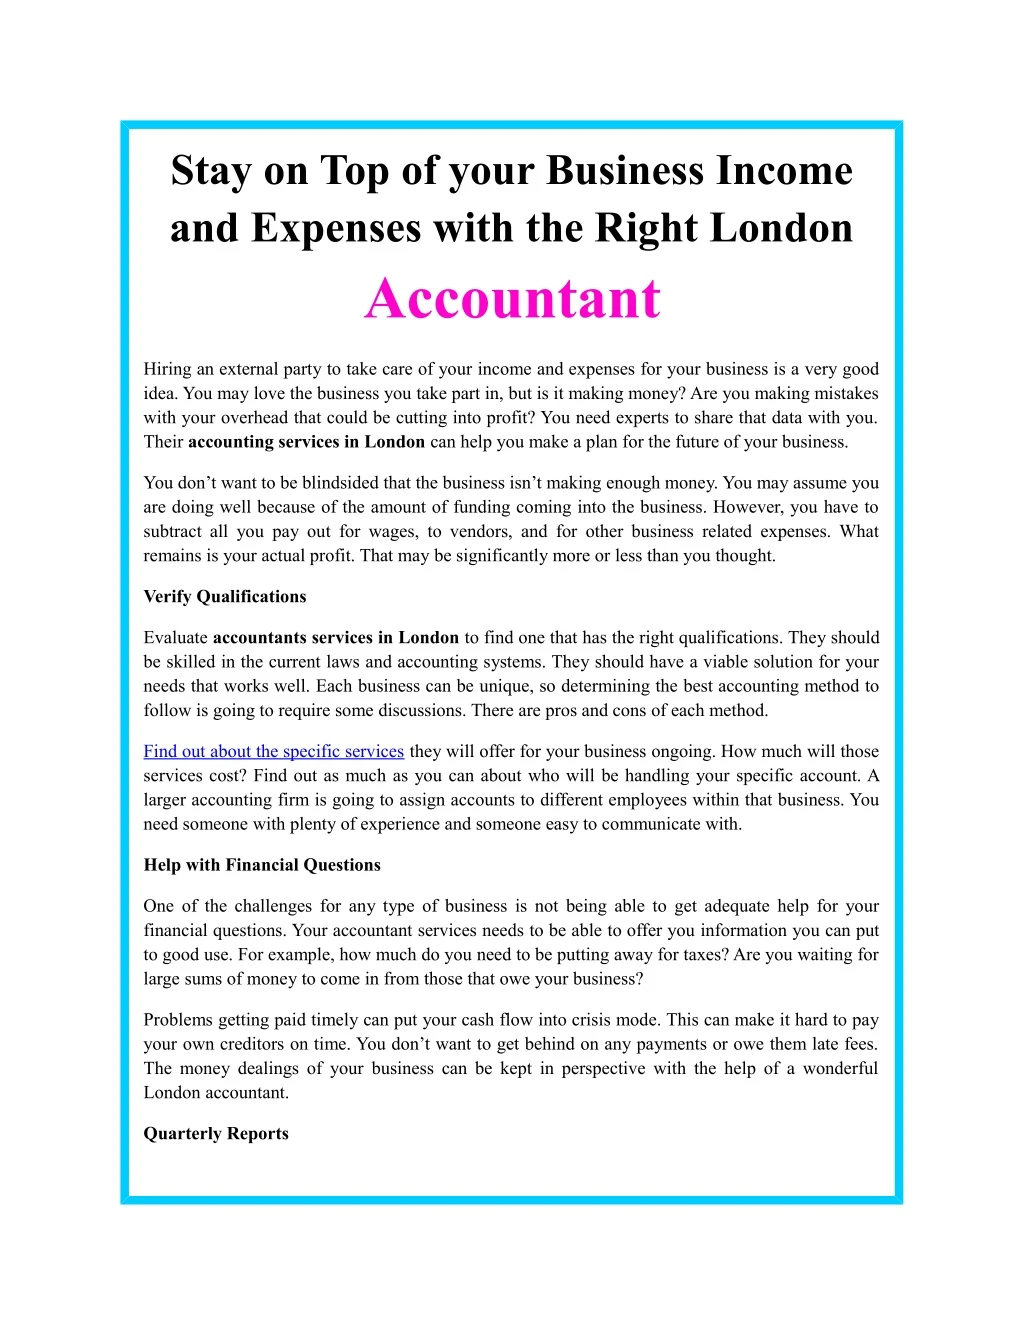 stay on top of your business income and expenses